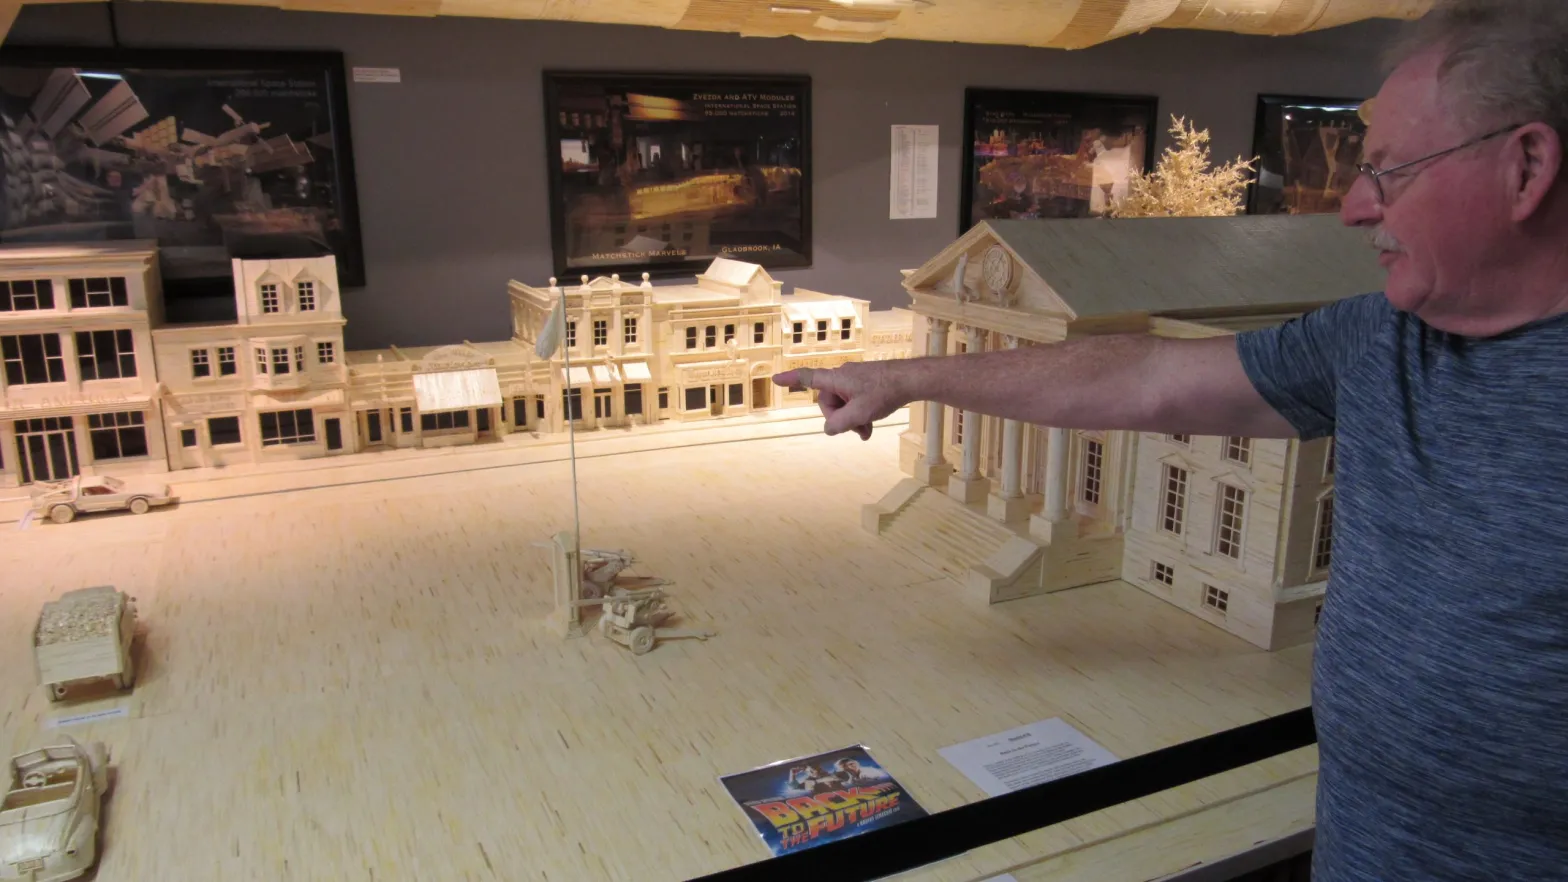 An older man in a blue shirt points at a miniature cityscape constructed of matchsticks.